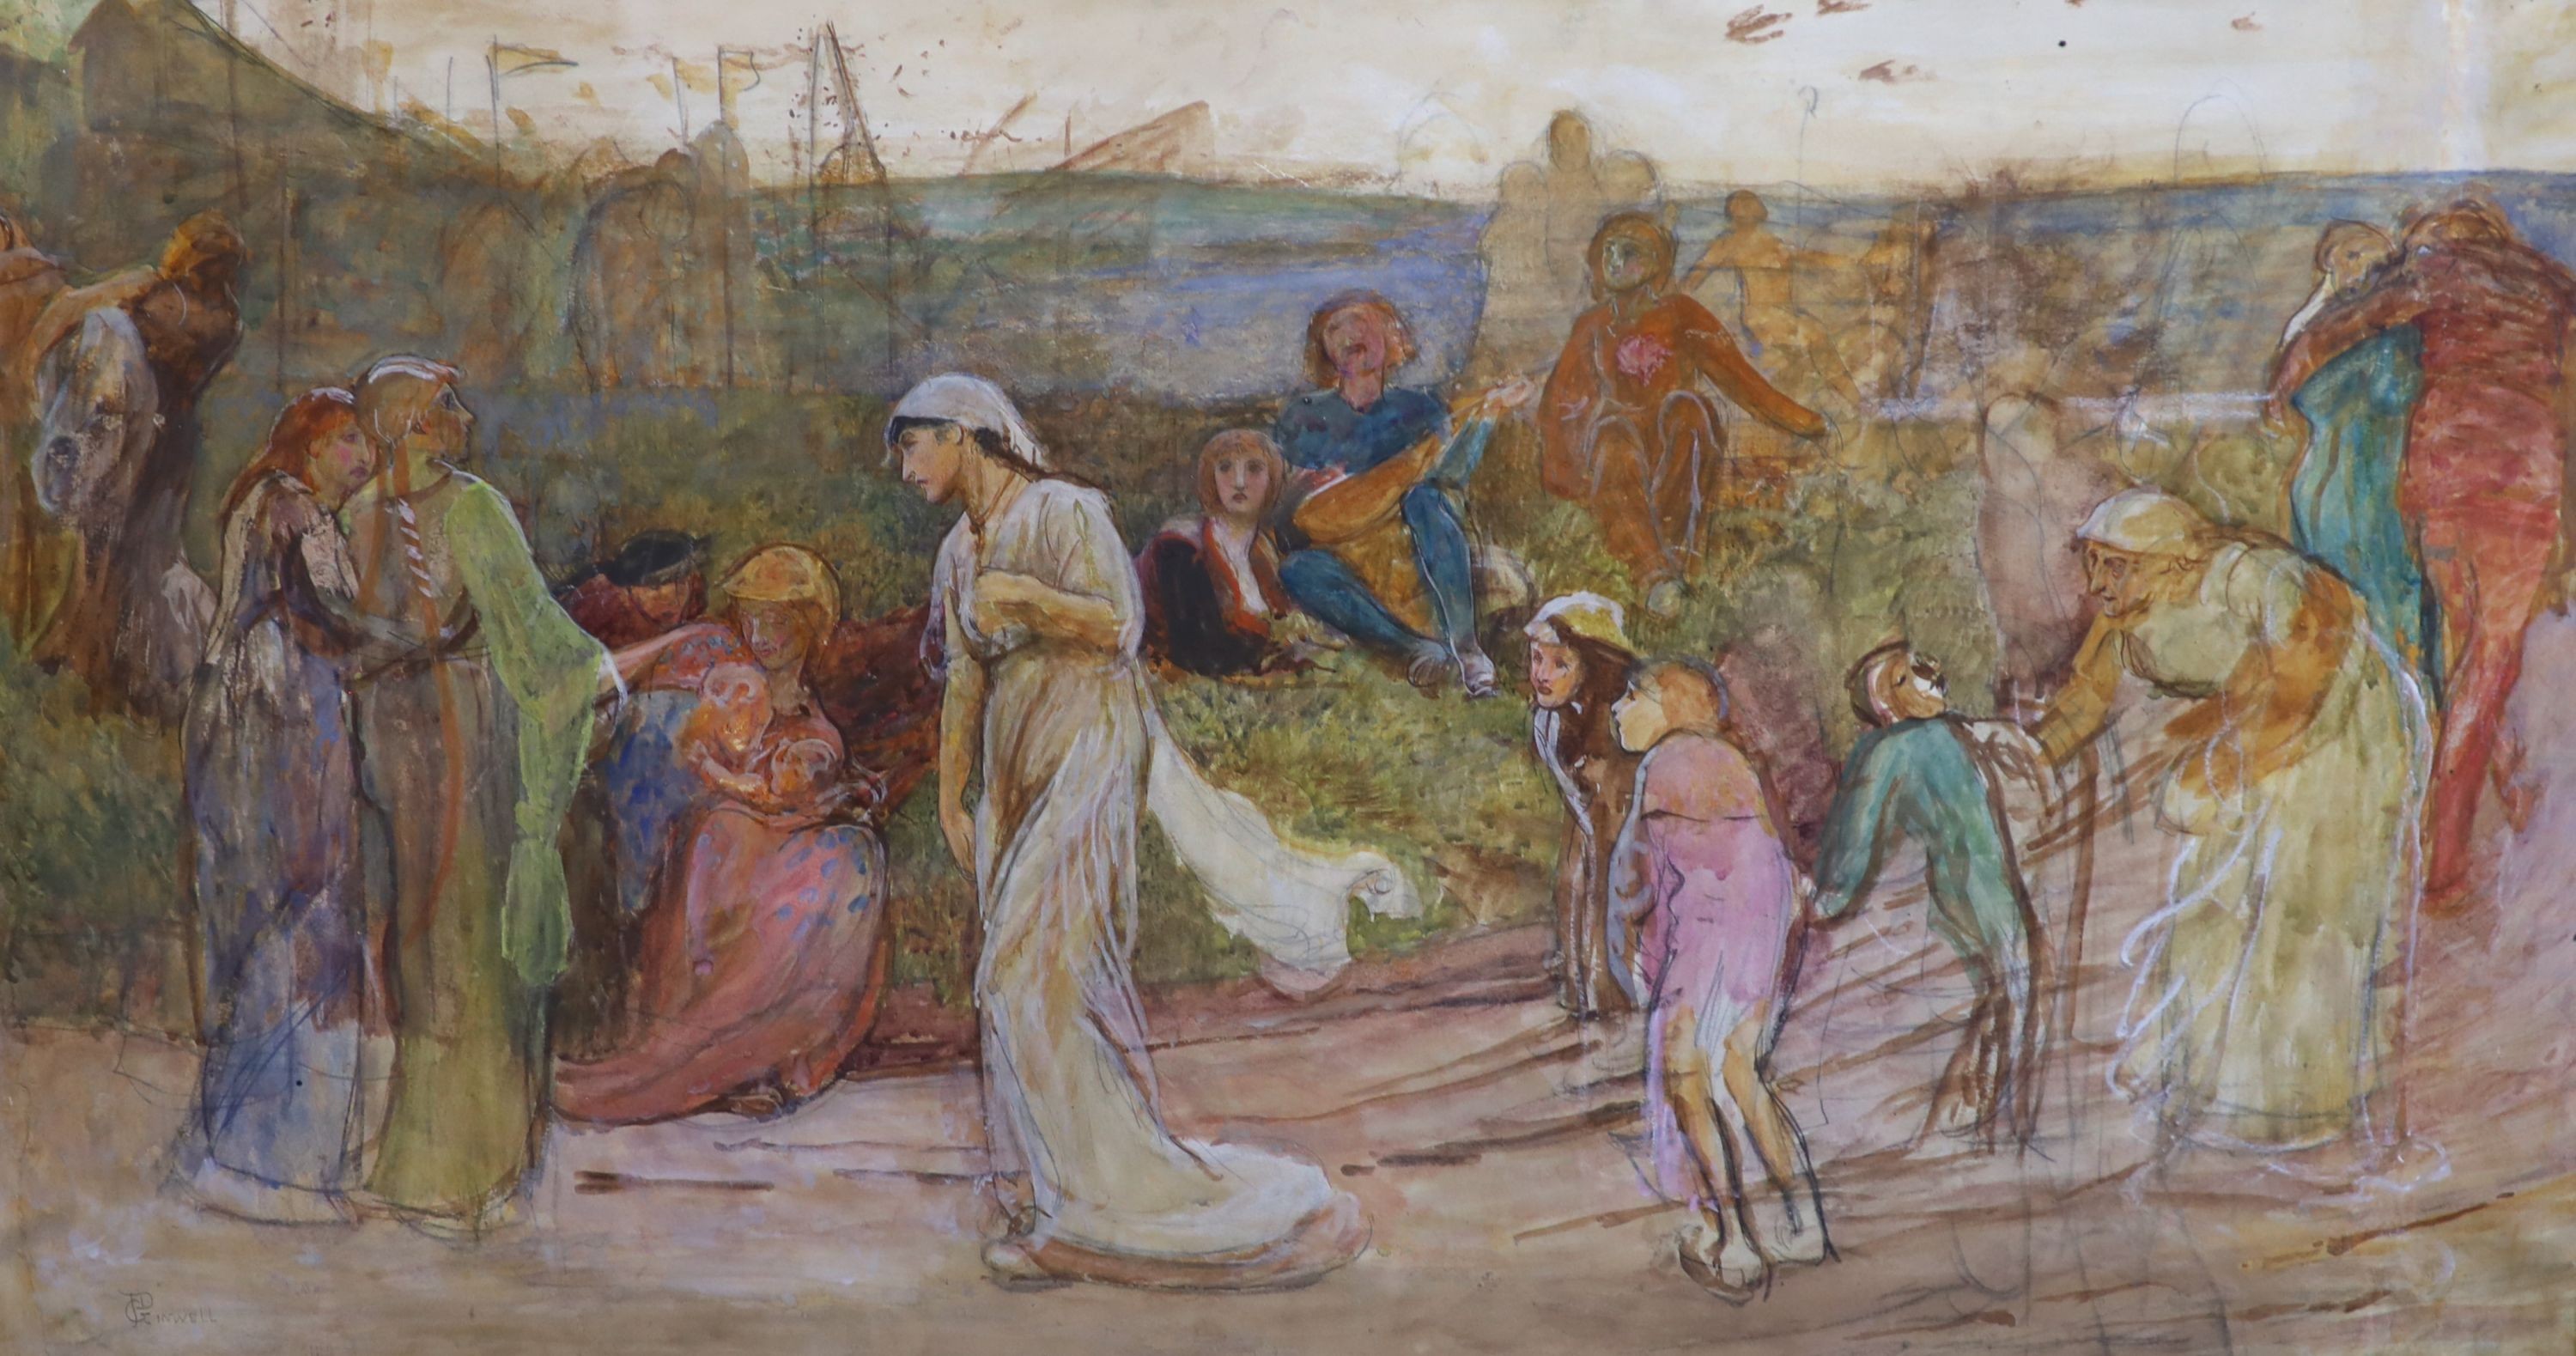 George John Pinwell, R.W.S, (1842-1875), Study for Gilbert à Becket's Troth, The Saracen Maiden entering London at Sundown, pencil and watercolour on paper, 53 x 97cm                                                      